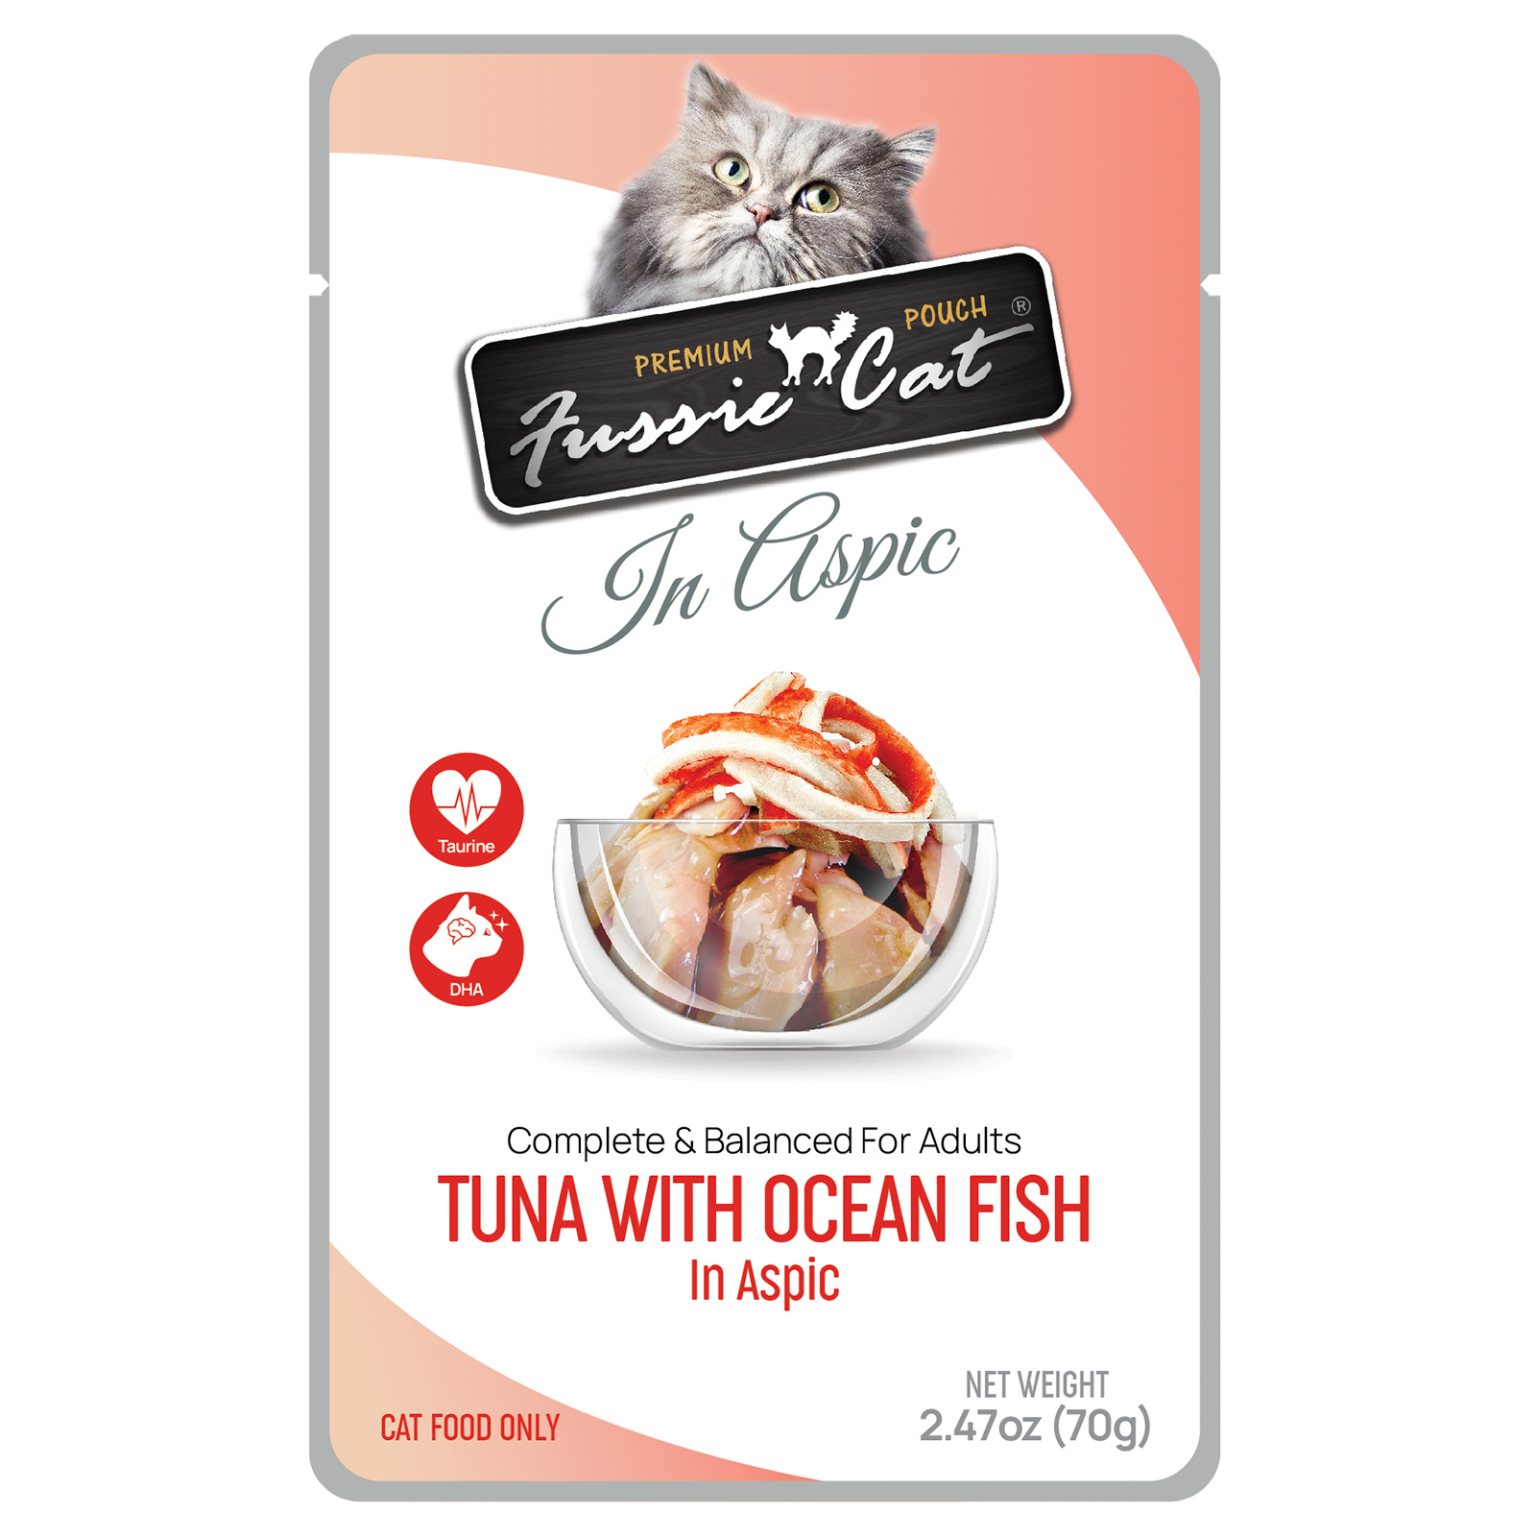 Tuna with Ocean Fish in Aspic Pouch